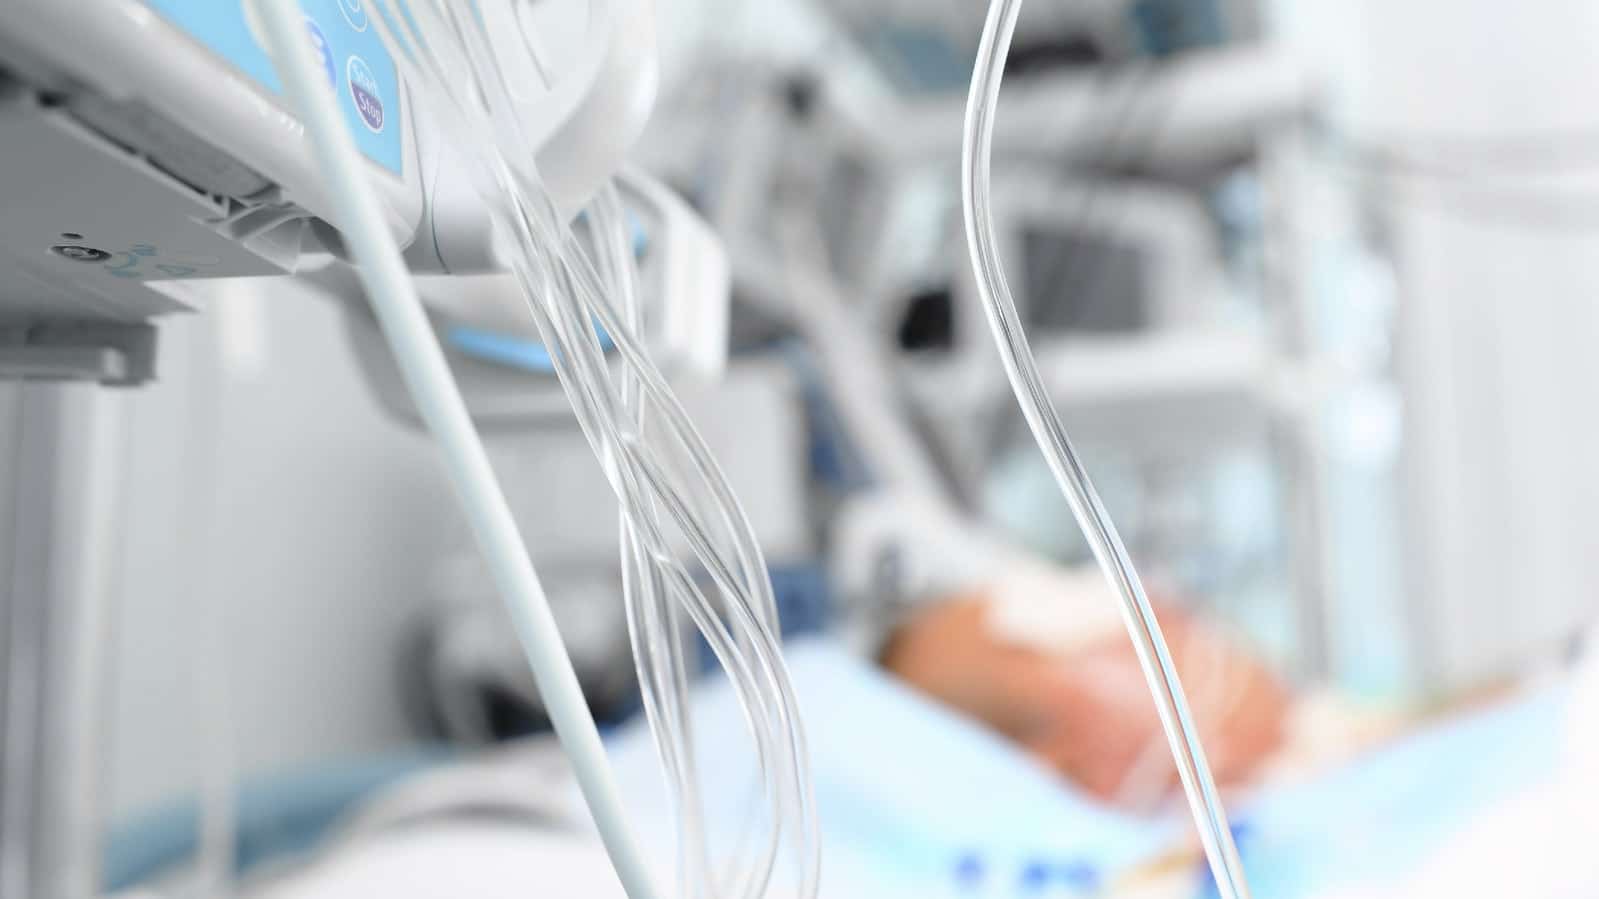 Hospital Bed And Tubes Stock Photo